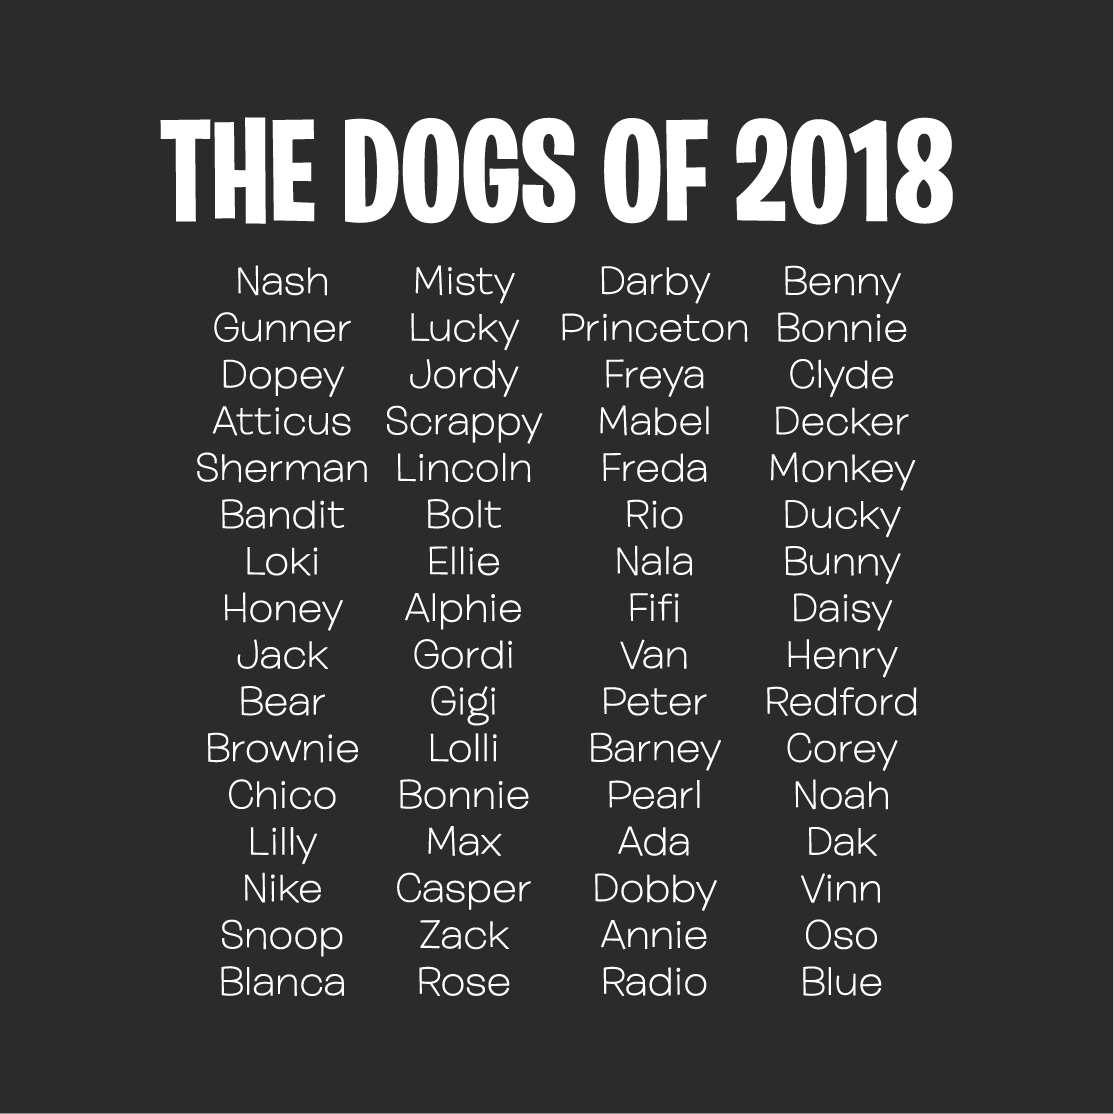 Dogs of 2018 shirt design - zoomed